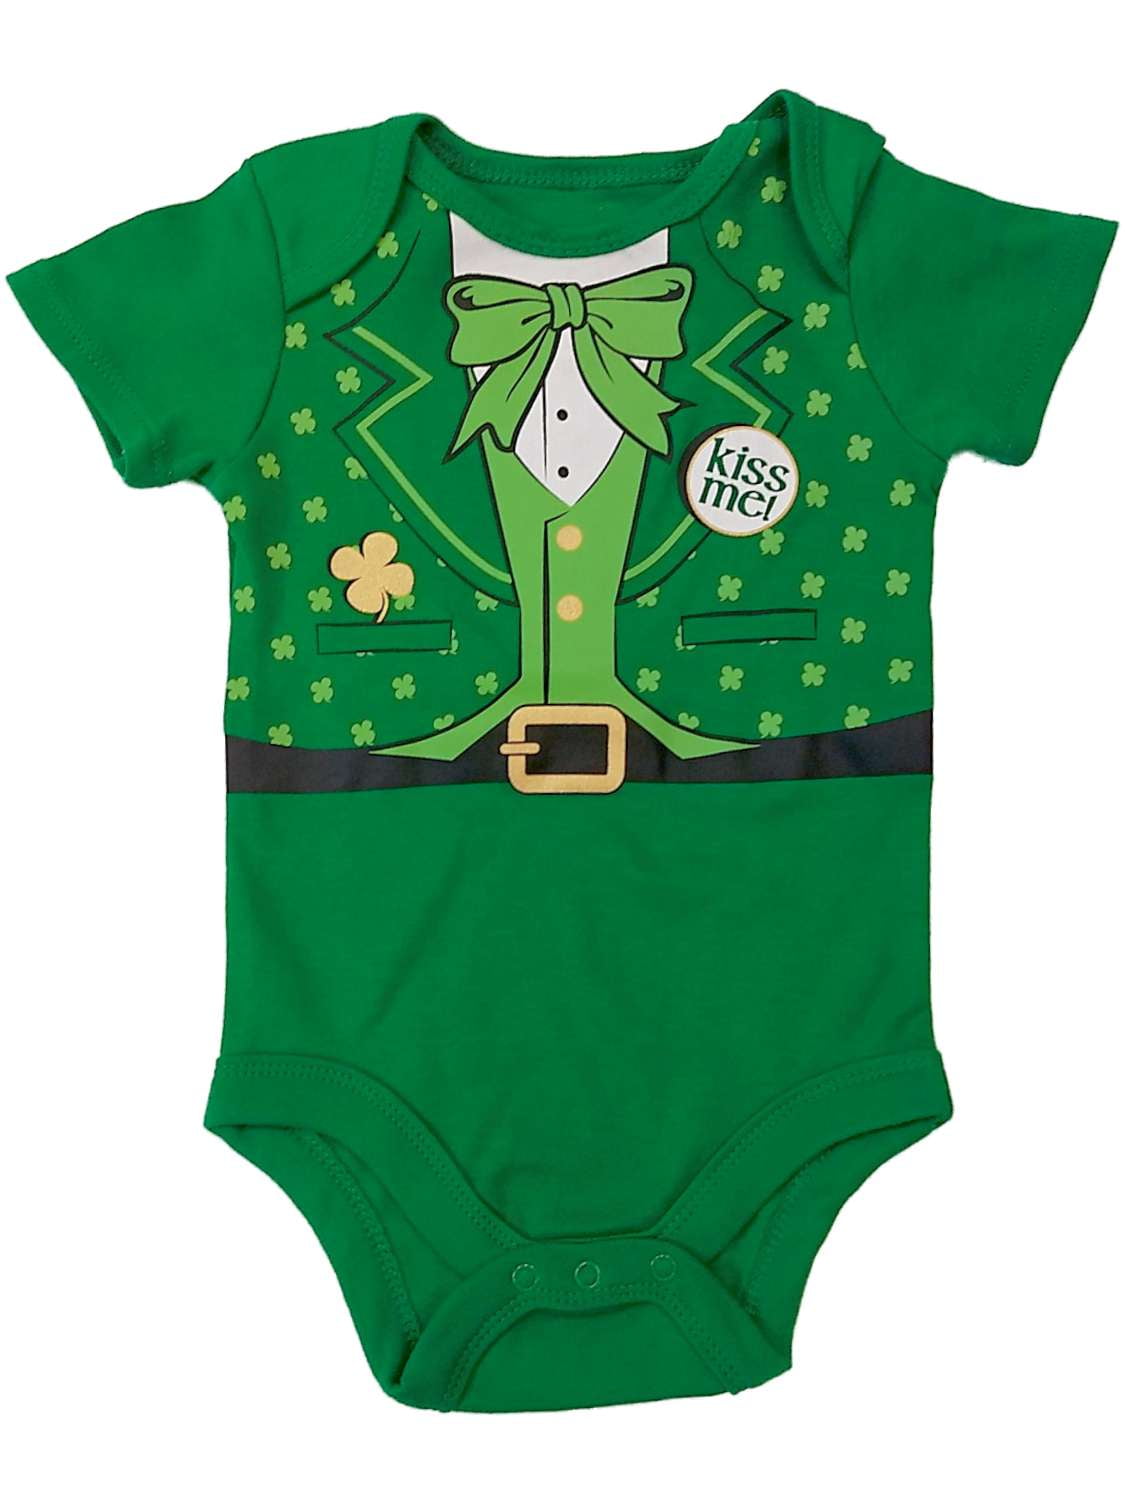 Green My Baby's 1st First St Saint Patrick's Day Lucky Horseshoe One Piece NB-6 